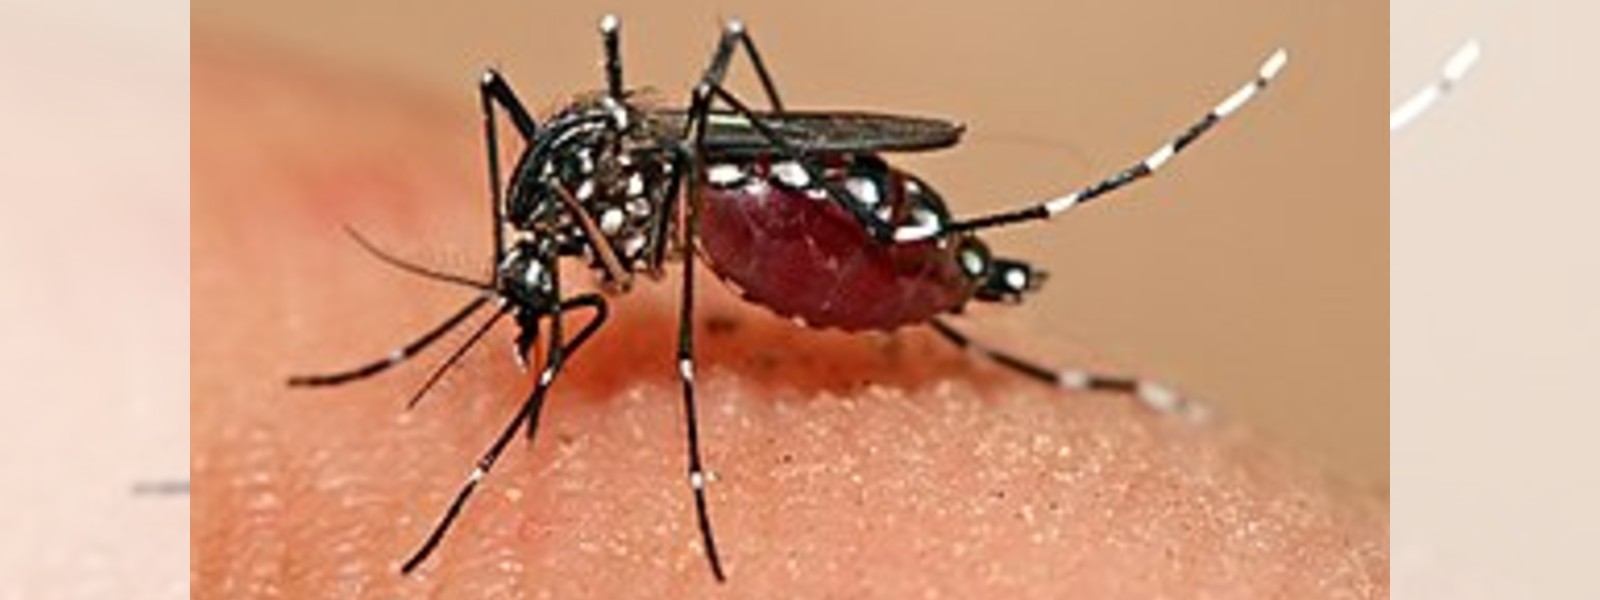 Risk of Dengue in Sri Lanka set to increase in the coming months